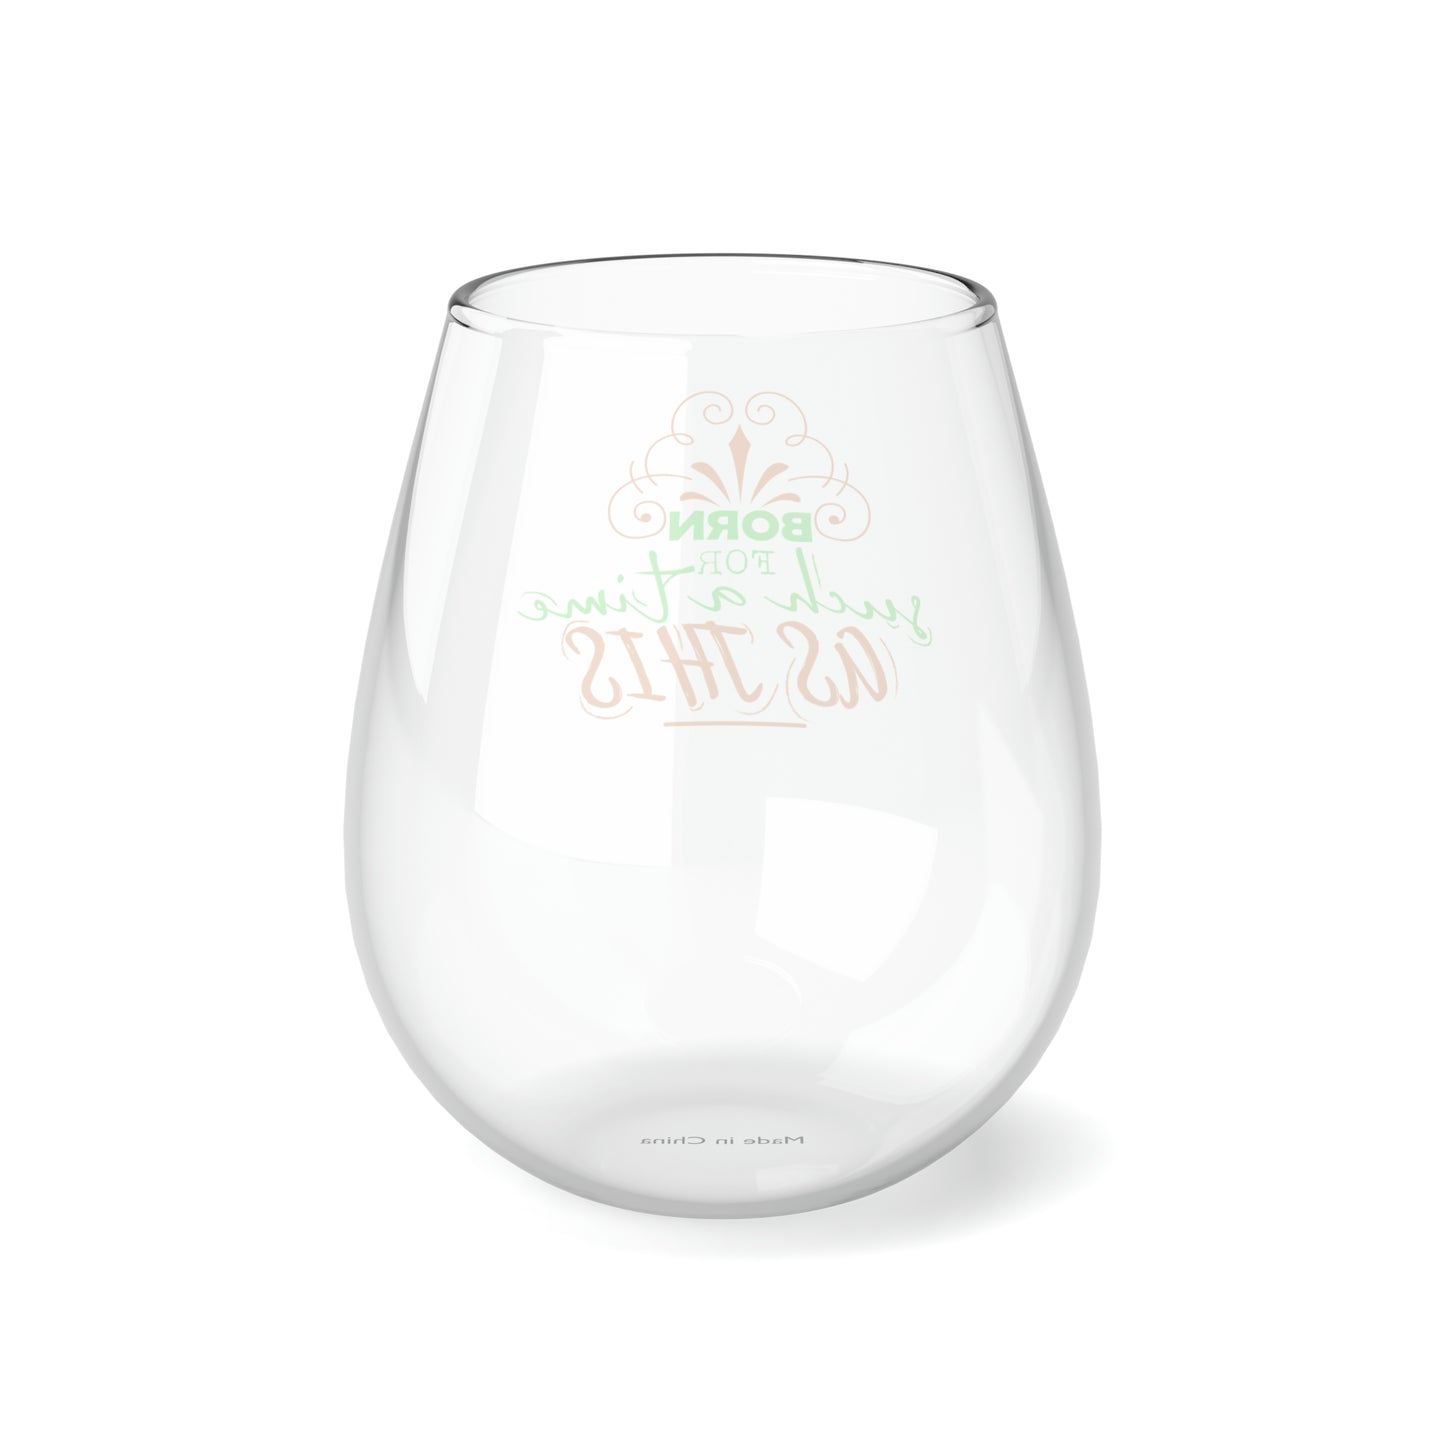 Born For Such A Time As This Stemless Wine Glass, 11.75oz